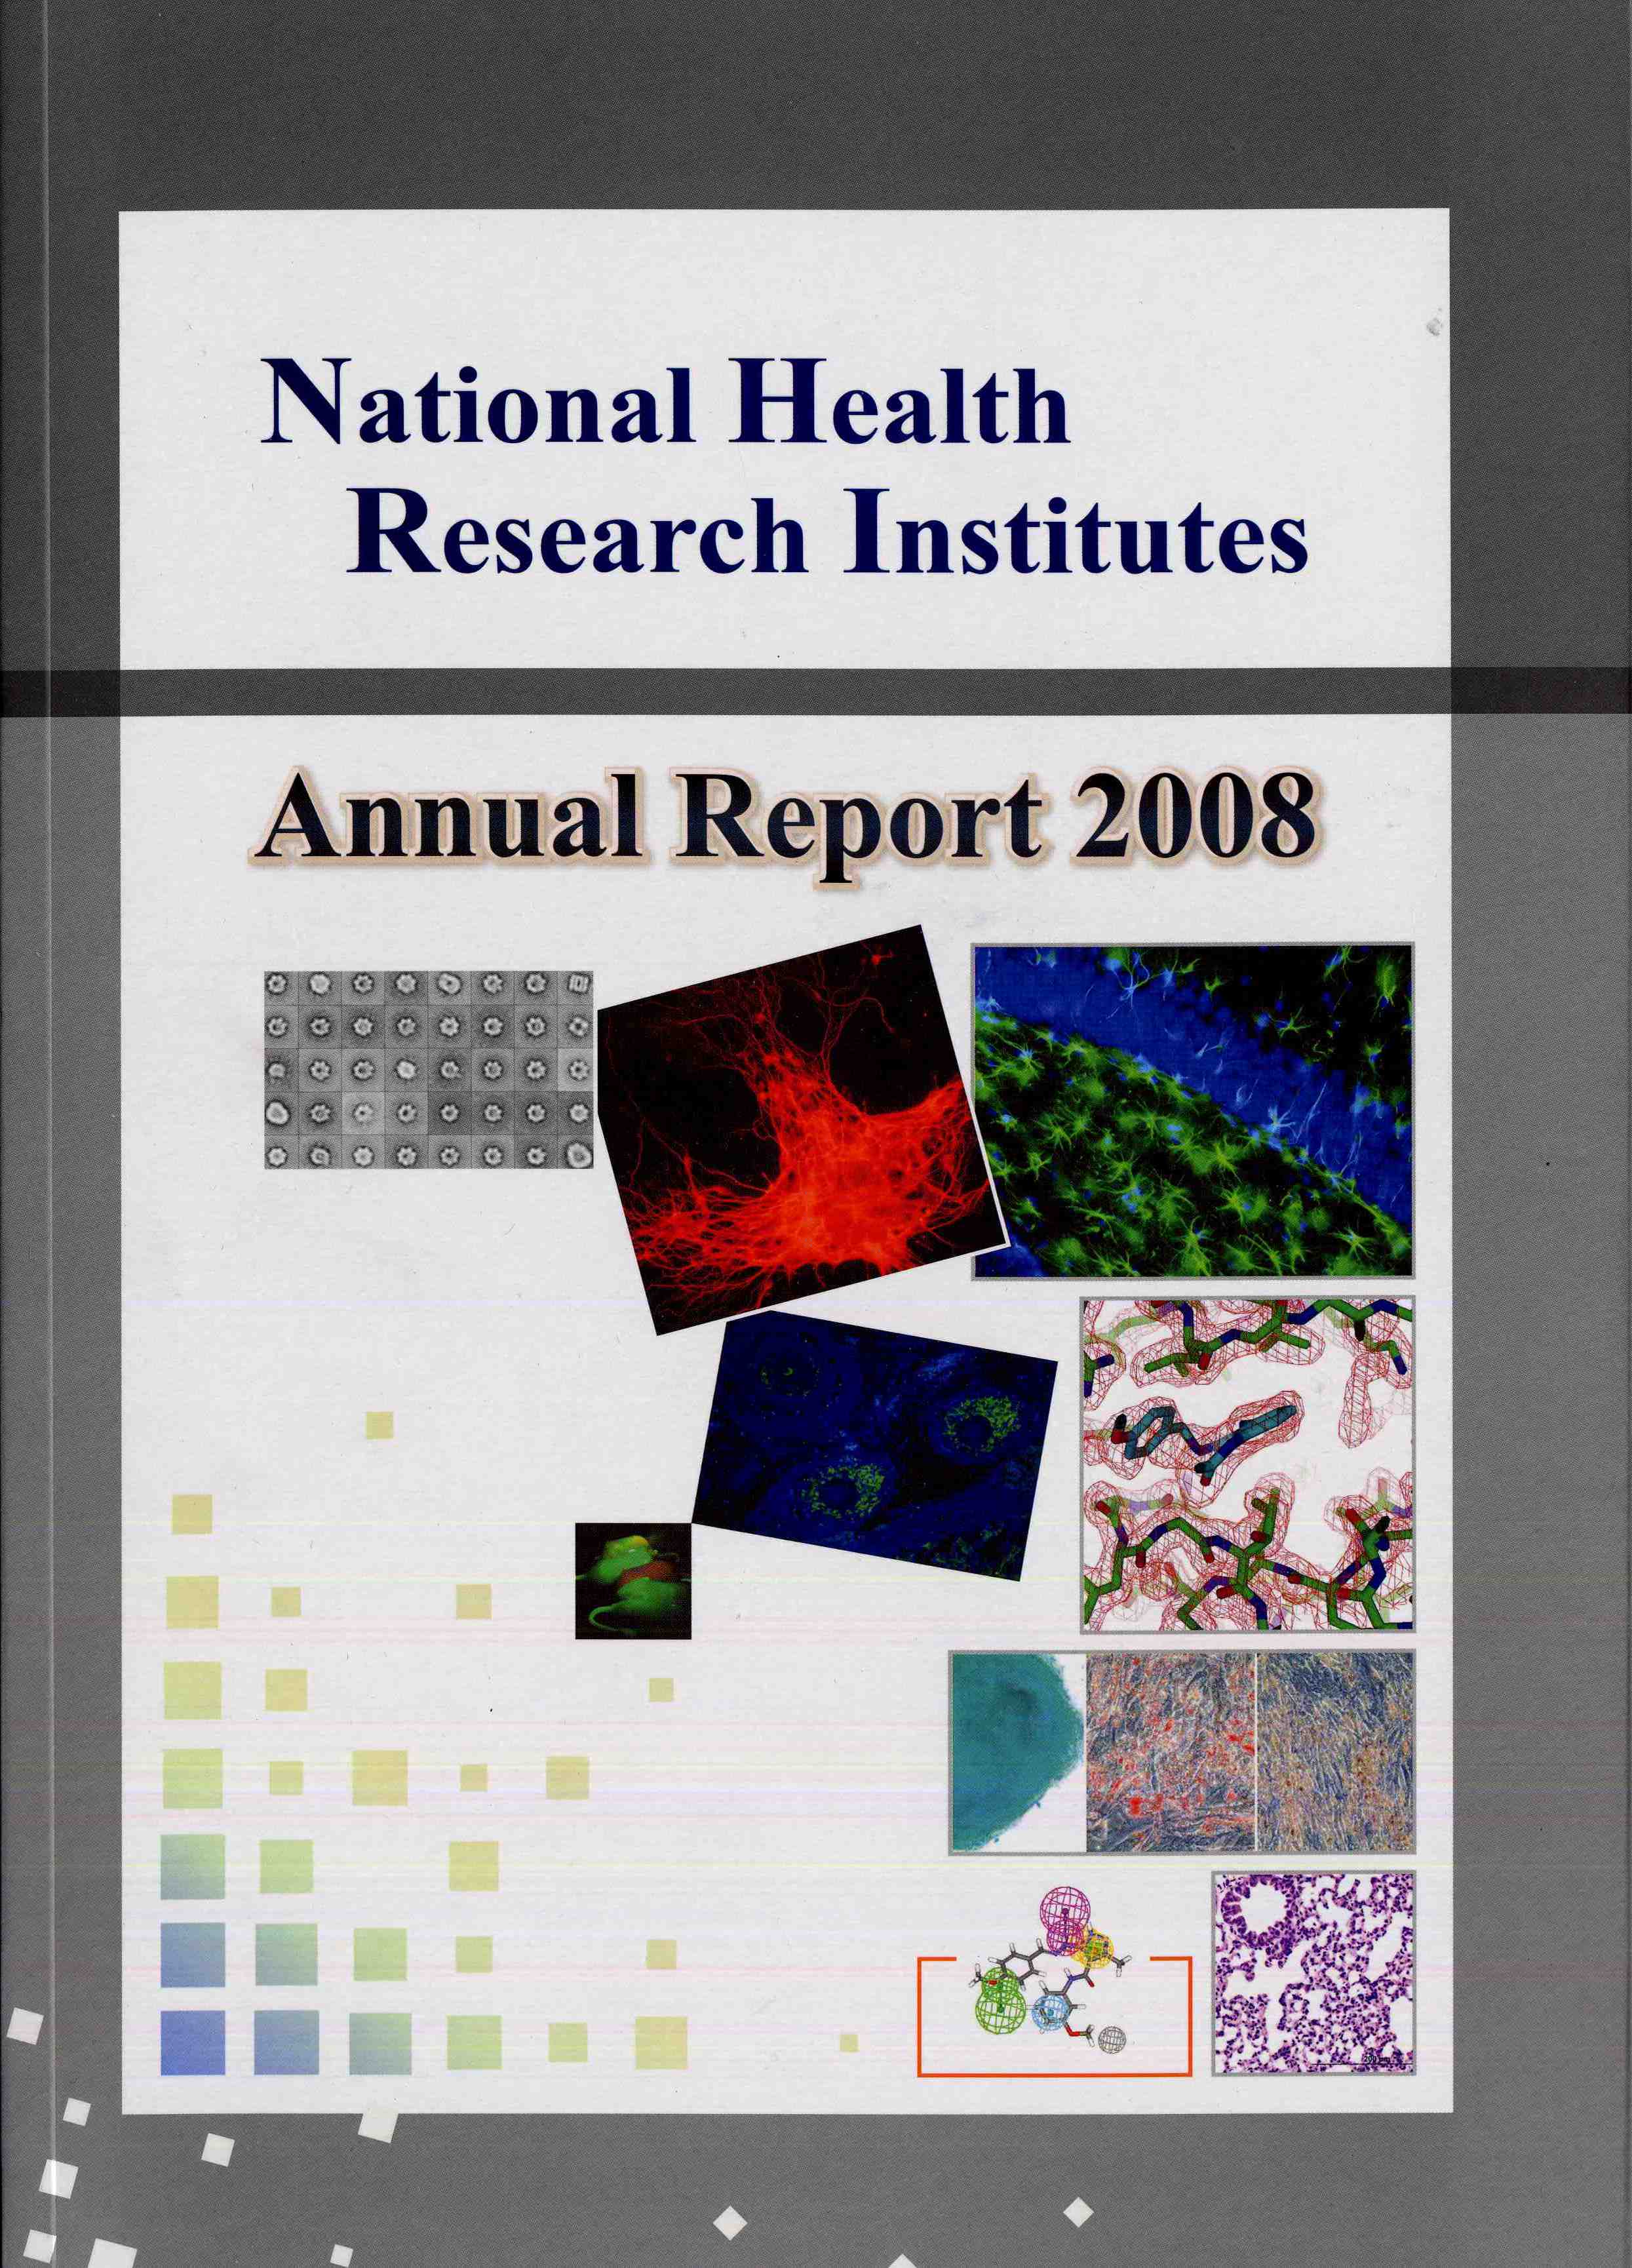 National Health Research Institutes Annual Report 2008